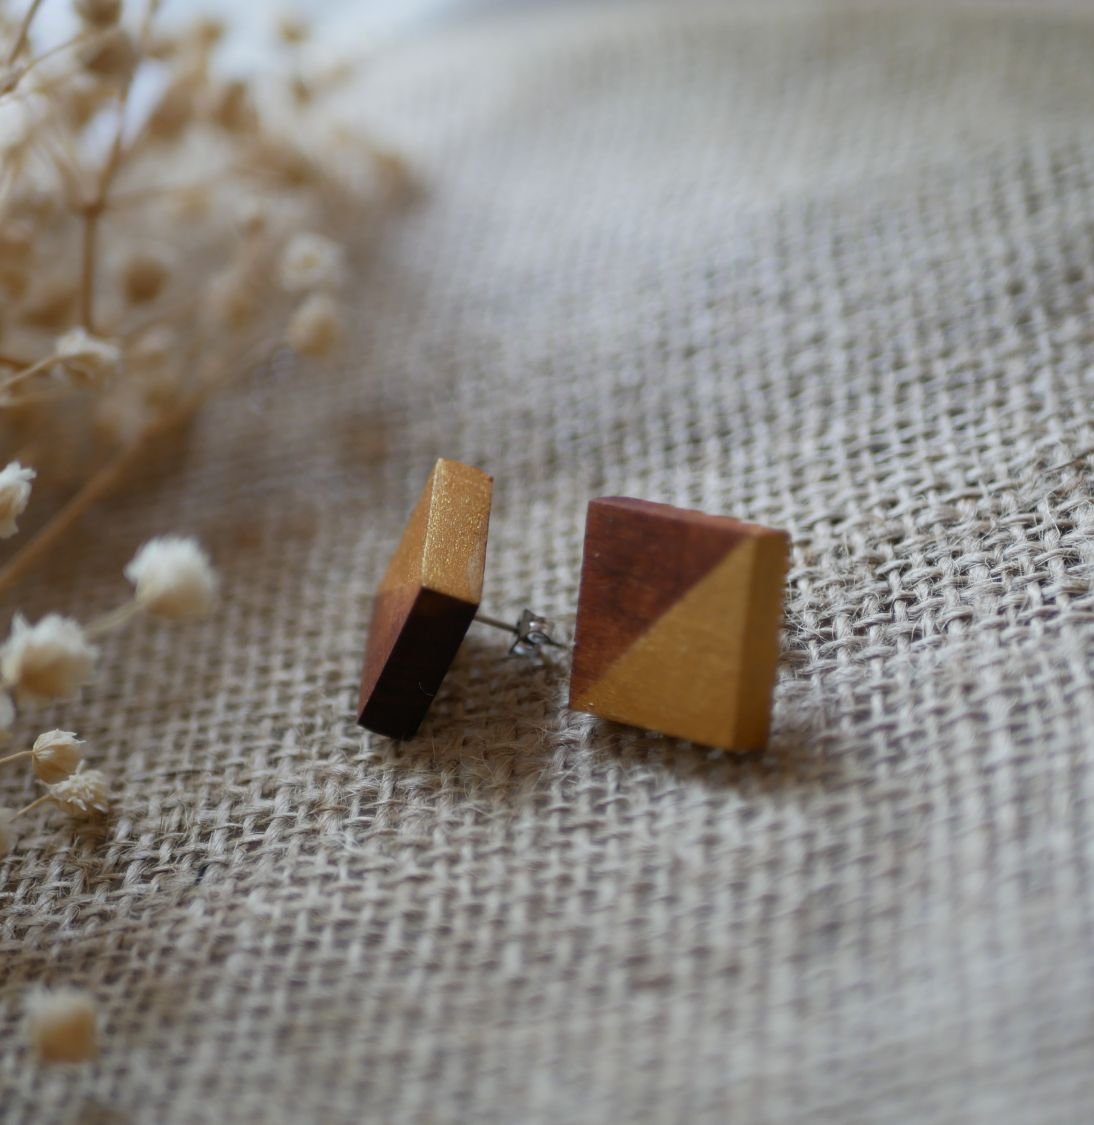 Round earrings in cherry wood painted in gold